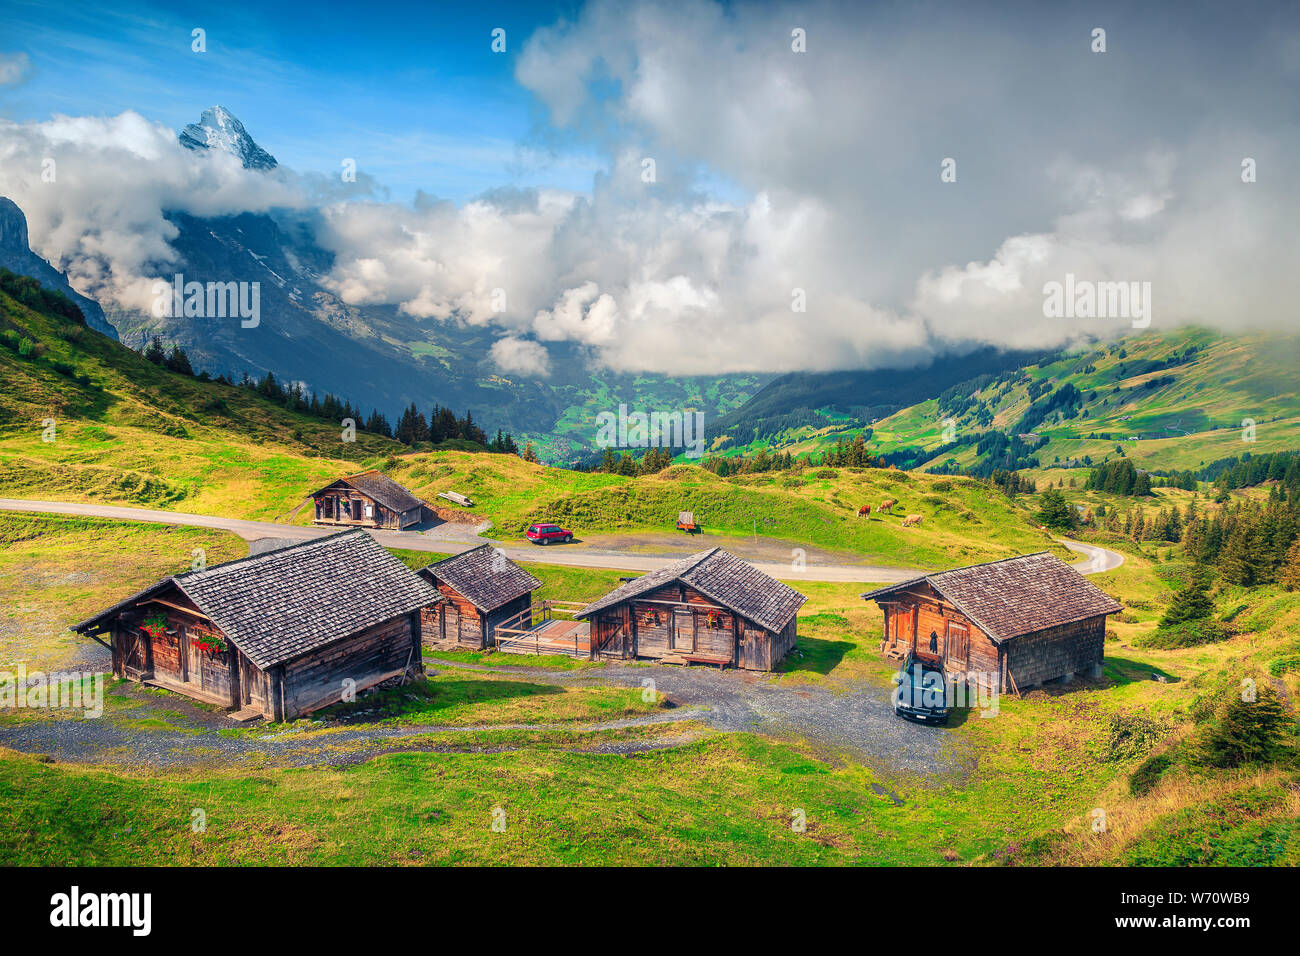 Popular touristic and travel location, alpine meadows and wooden rural farmhouses, Swiss Alps in background, Grindelwald, Bernese Oberland, Switzerlan Stock Photo